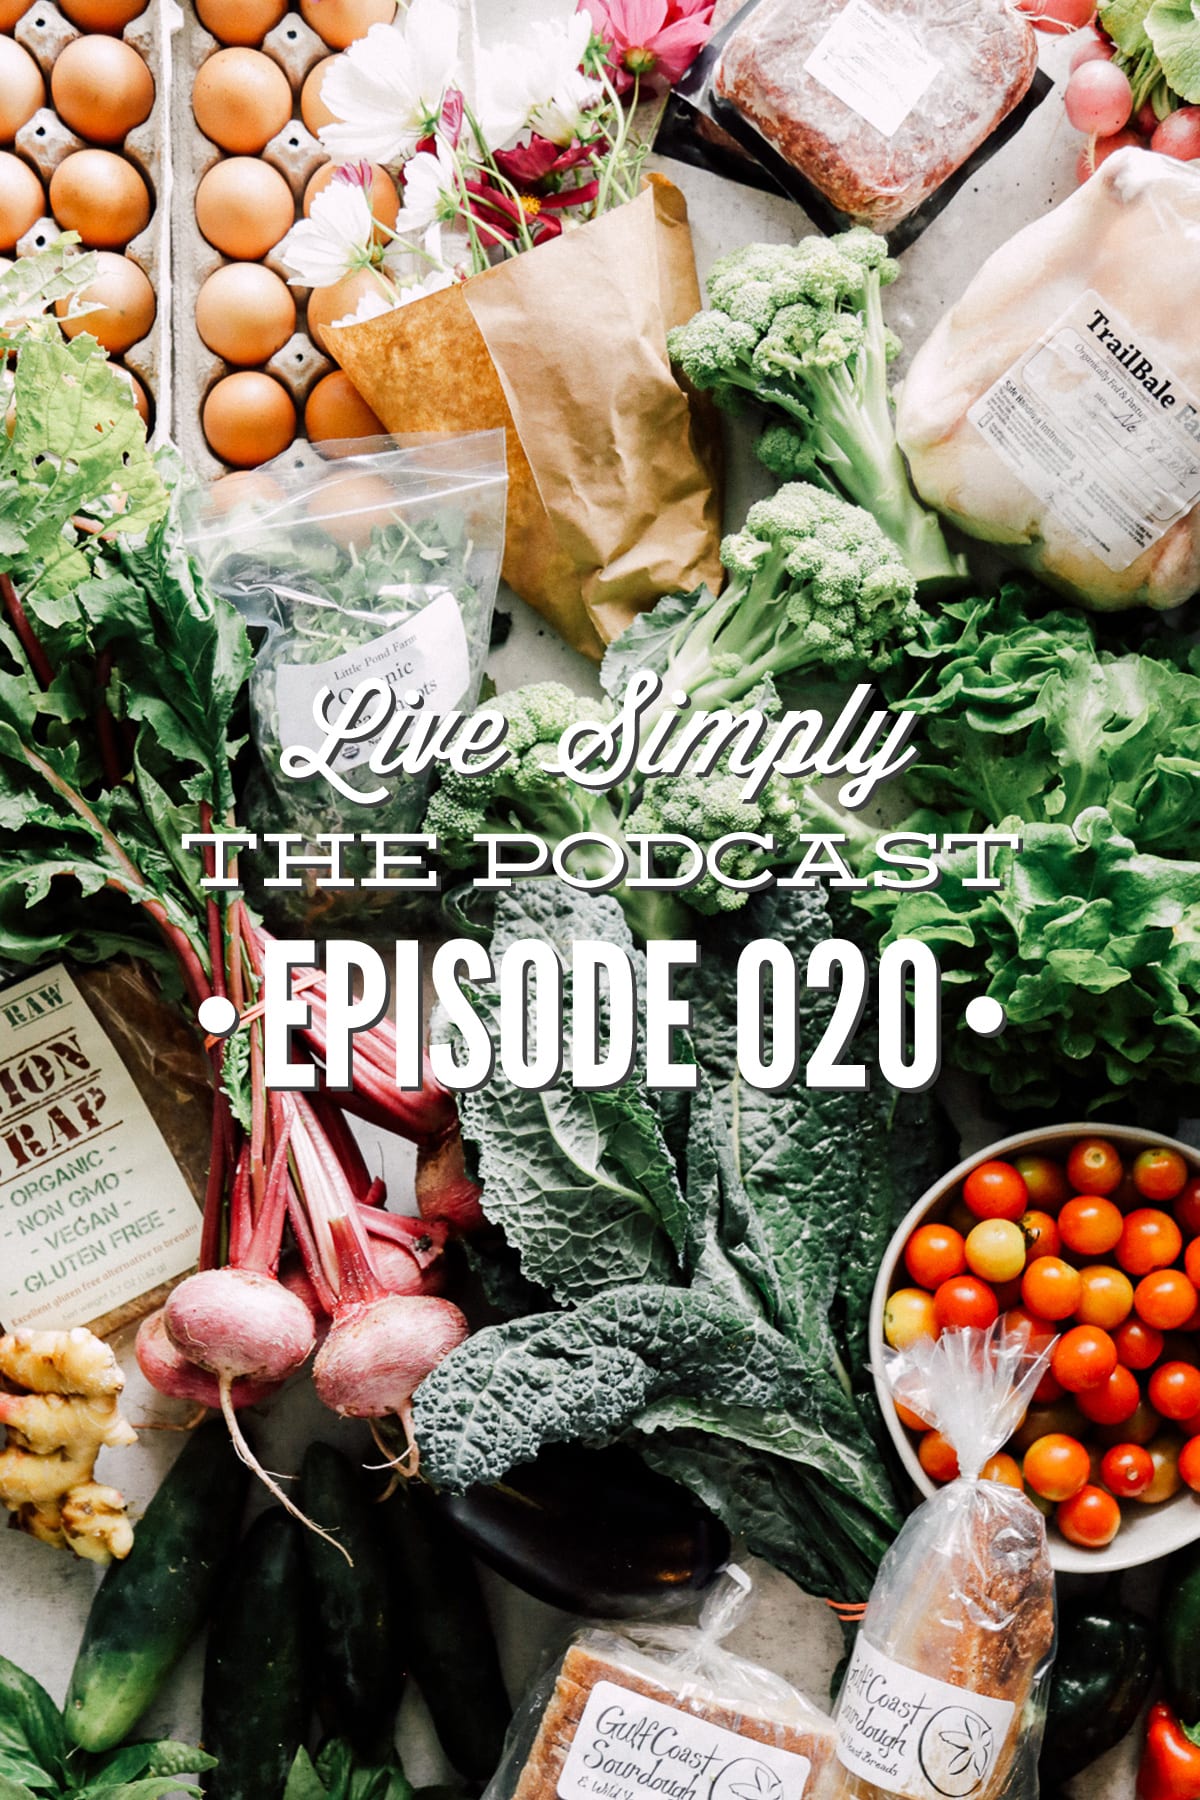 Podcast 020: The Environmentally-Beneficial to Consume Meat with Travis from Trailbale Farm